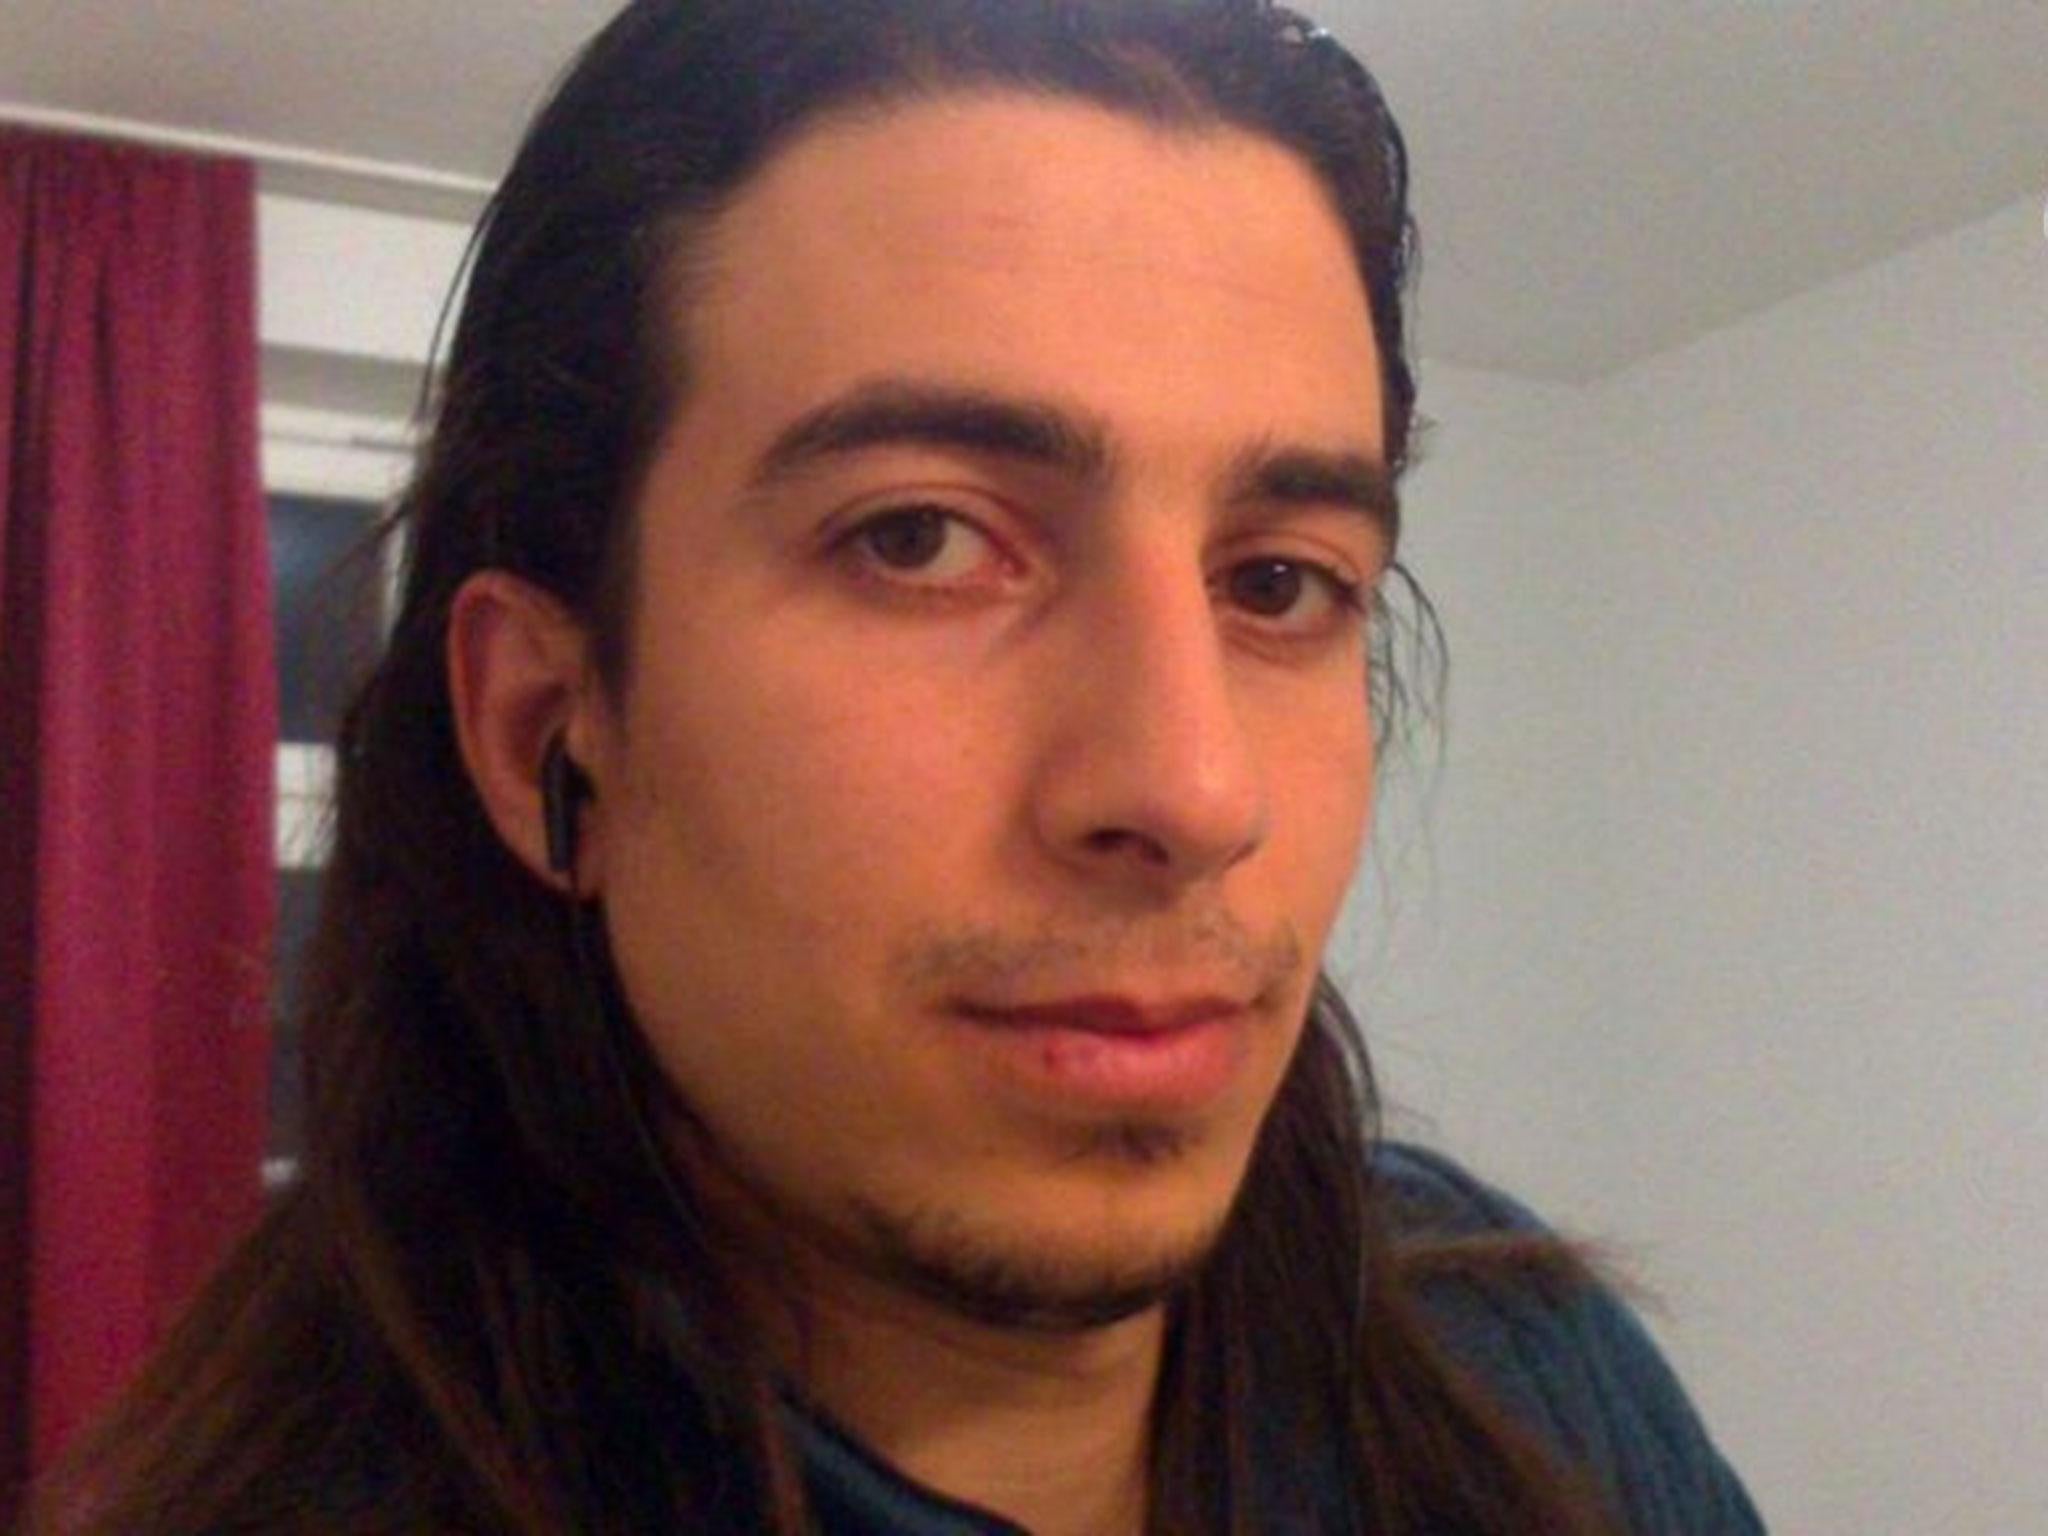 Mohammad Daleel, a Syrian asylum-seeker, killed himself in a suicide bombing in the German city of Ansbach last year